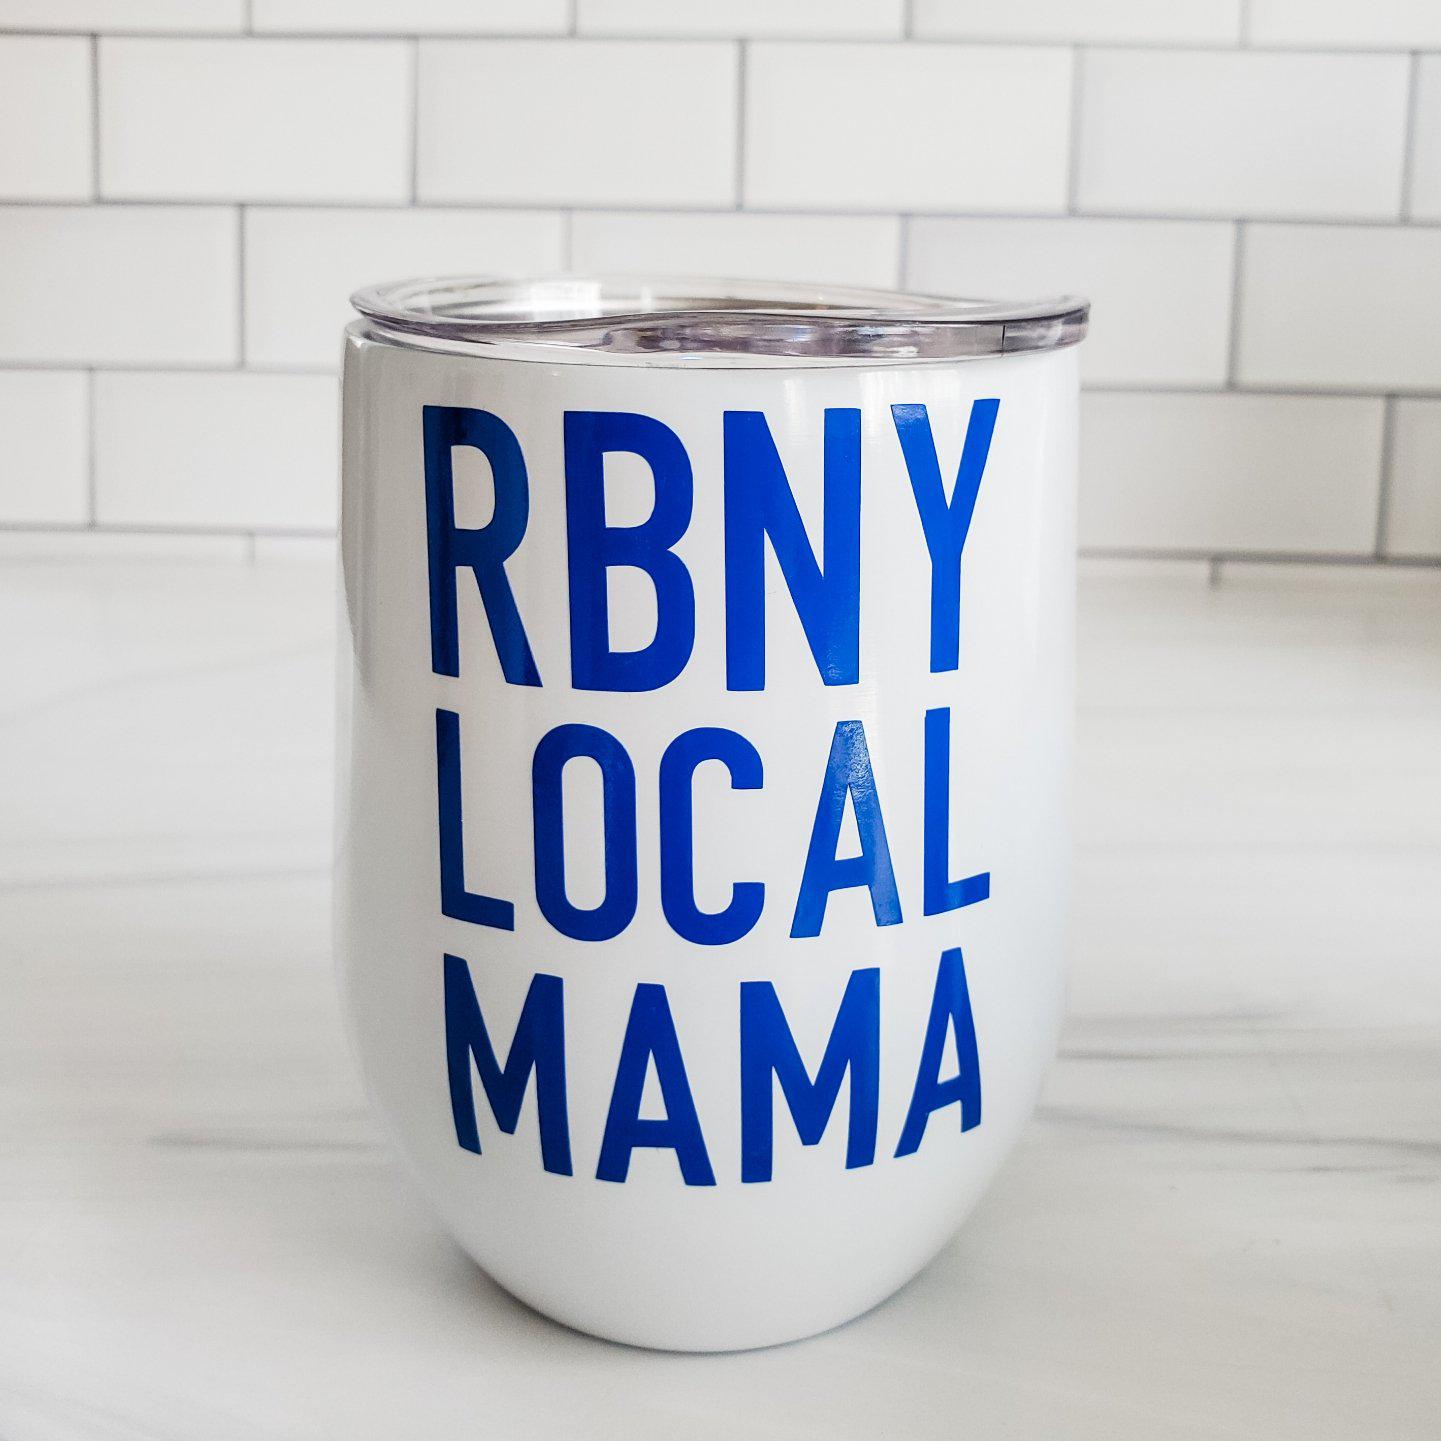 RBNY Local Mama Insulated Outdoor Wine Tumbler Salt and Sparkle